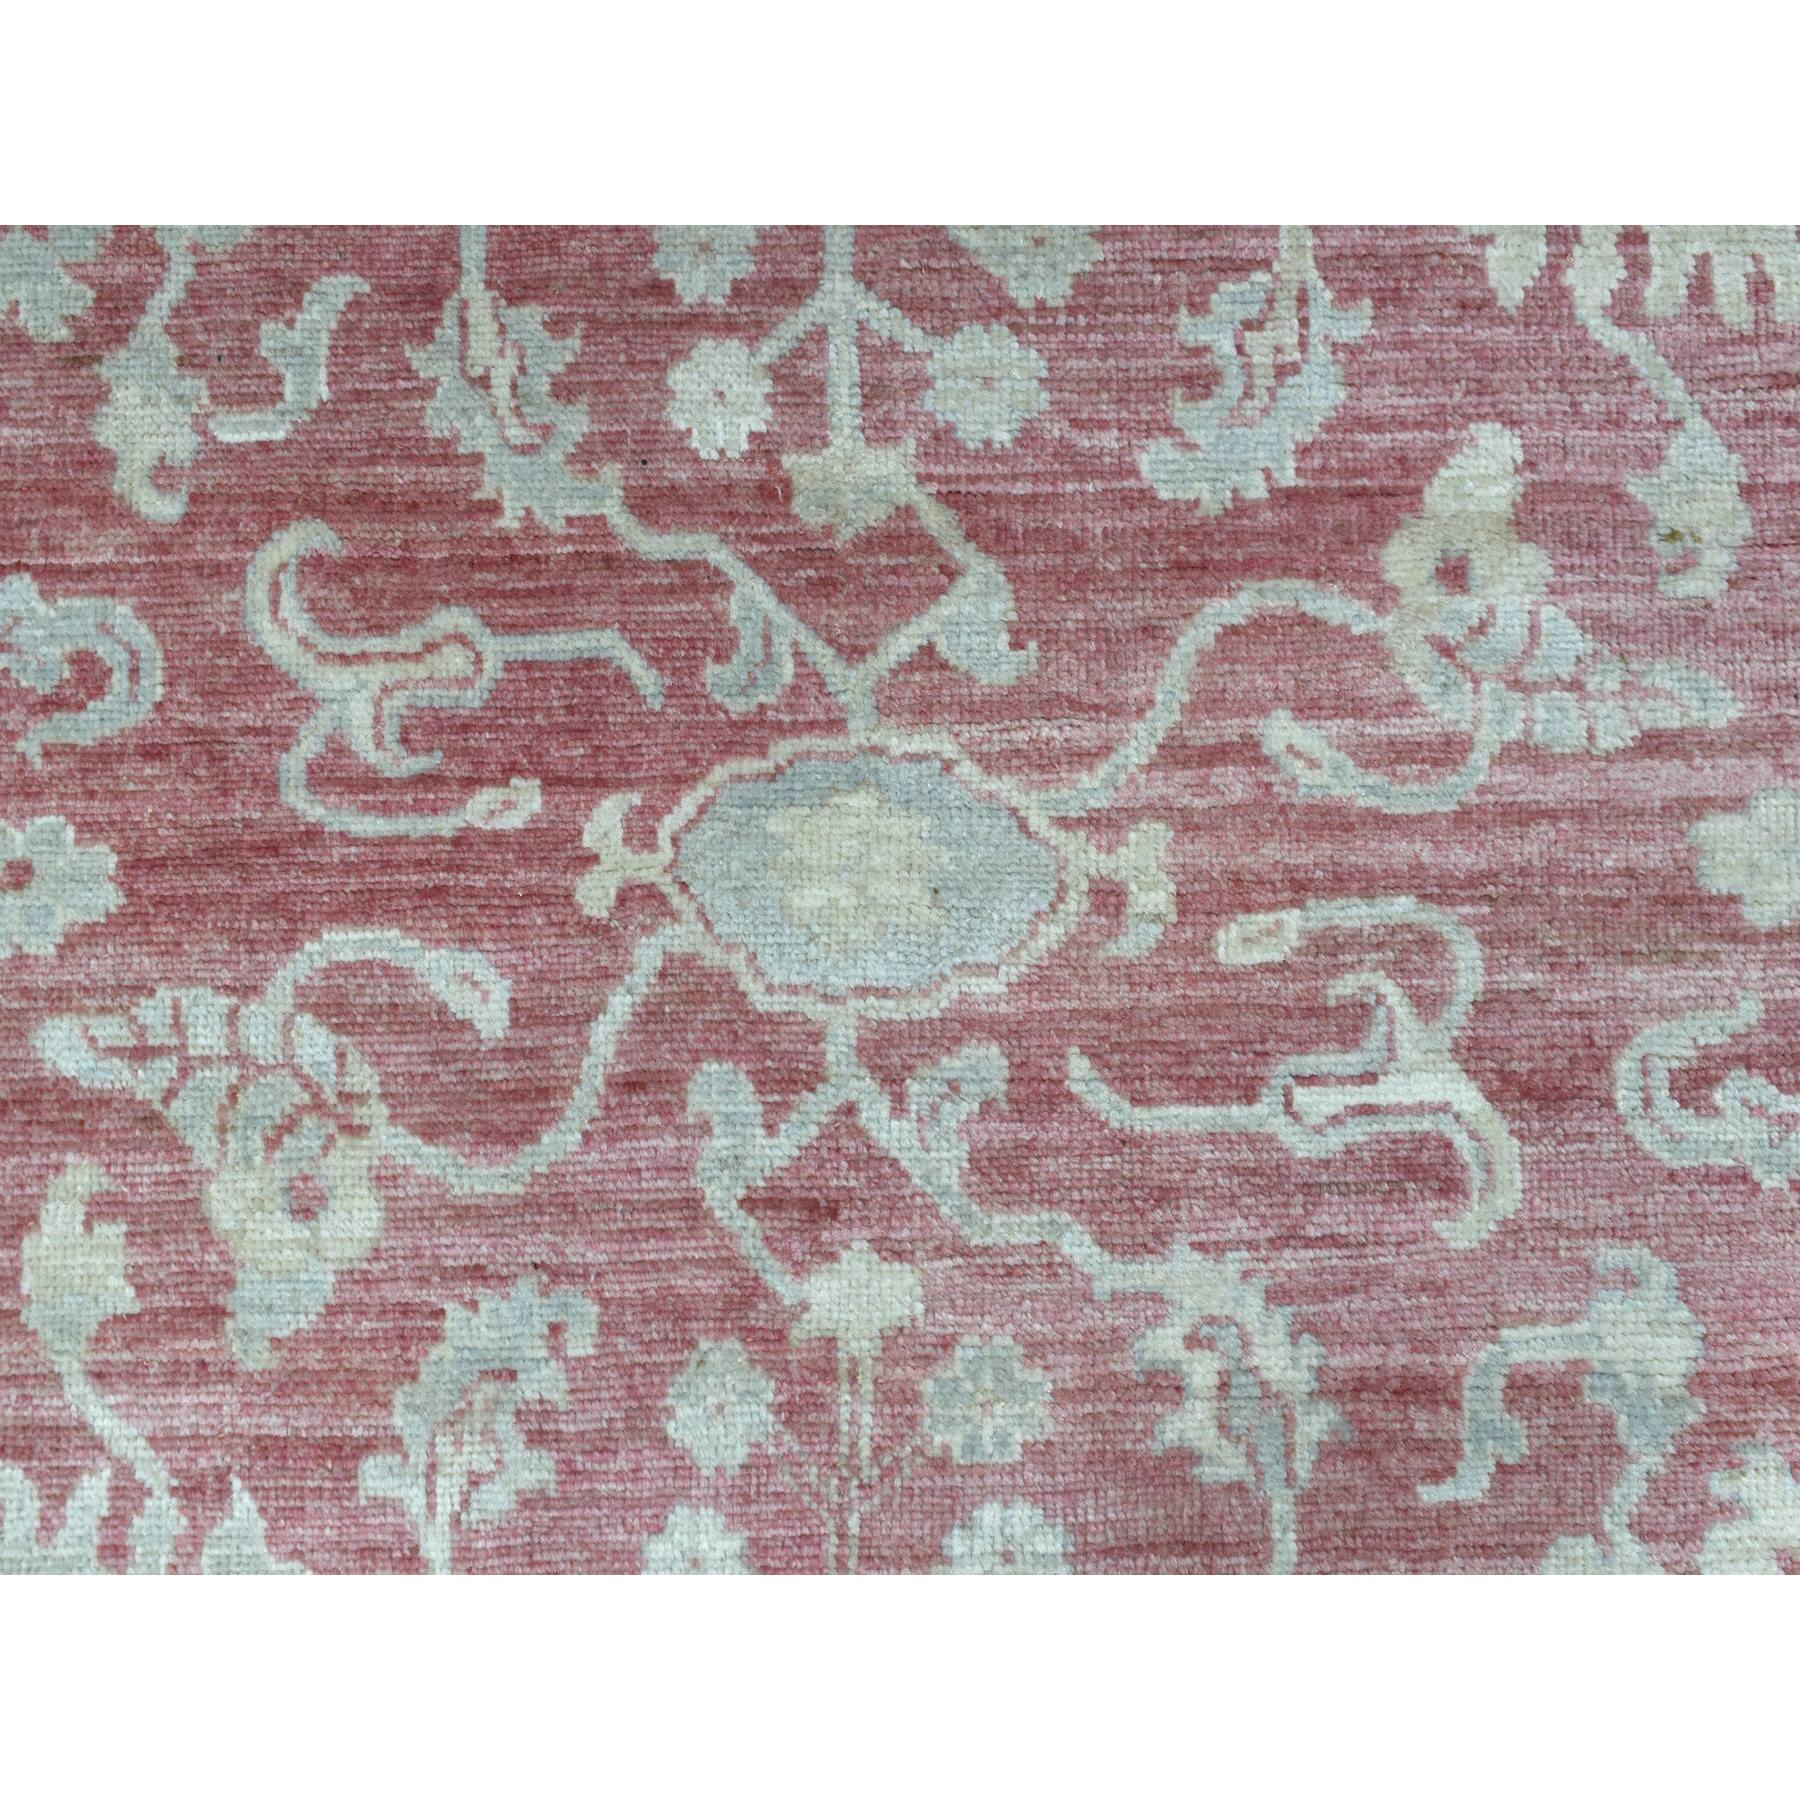 8'2"x9'10" Coral Pink Afghan Angora Oushak with Assortment of Colors Pure Wool Hand Woven Oriental Rug 